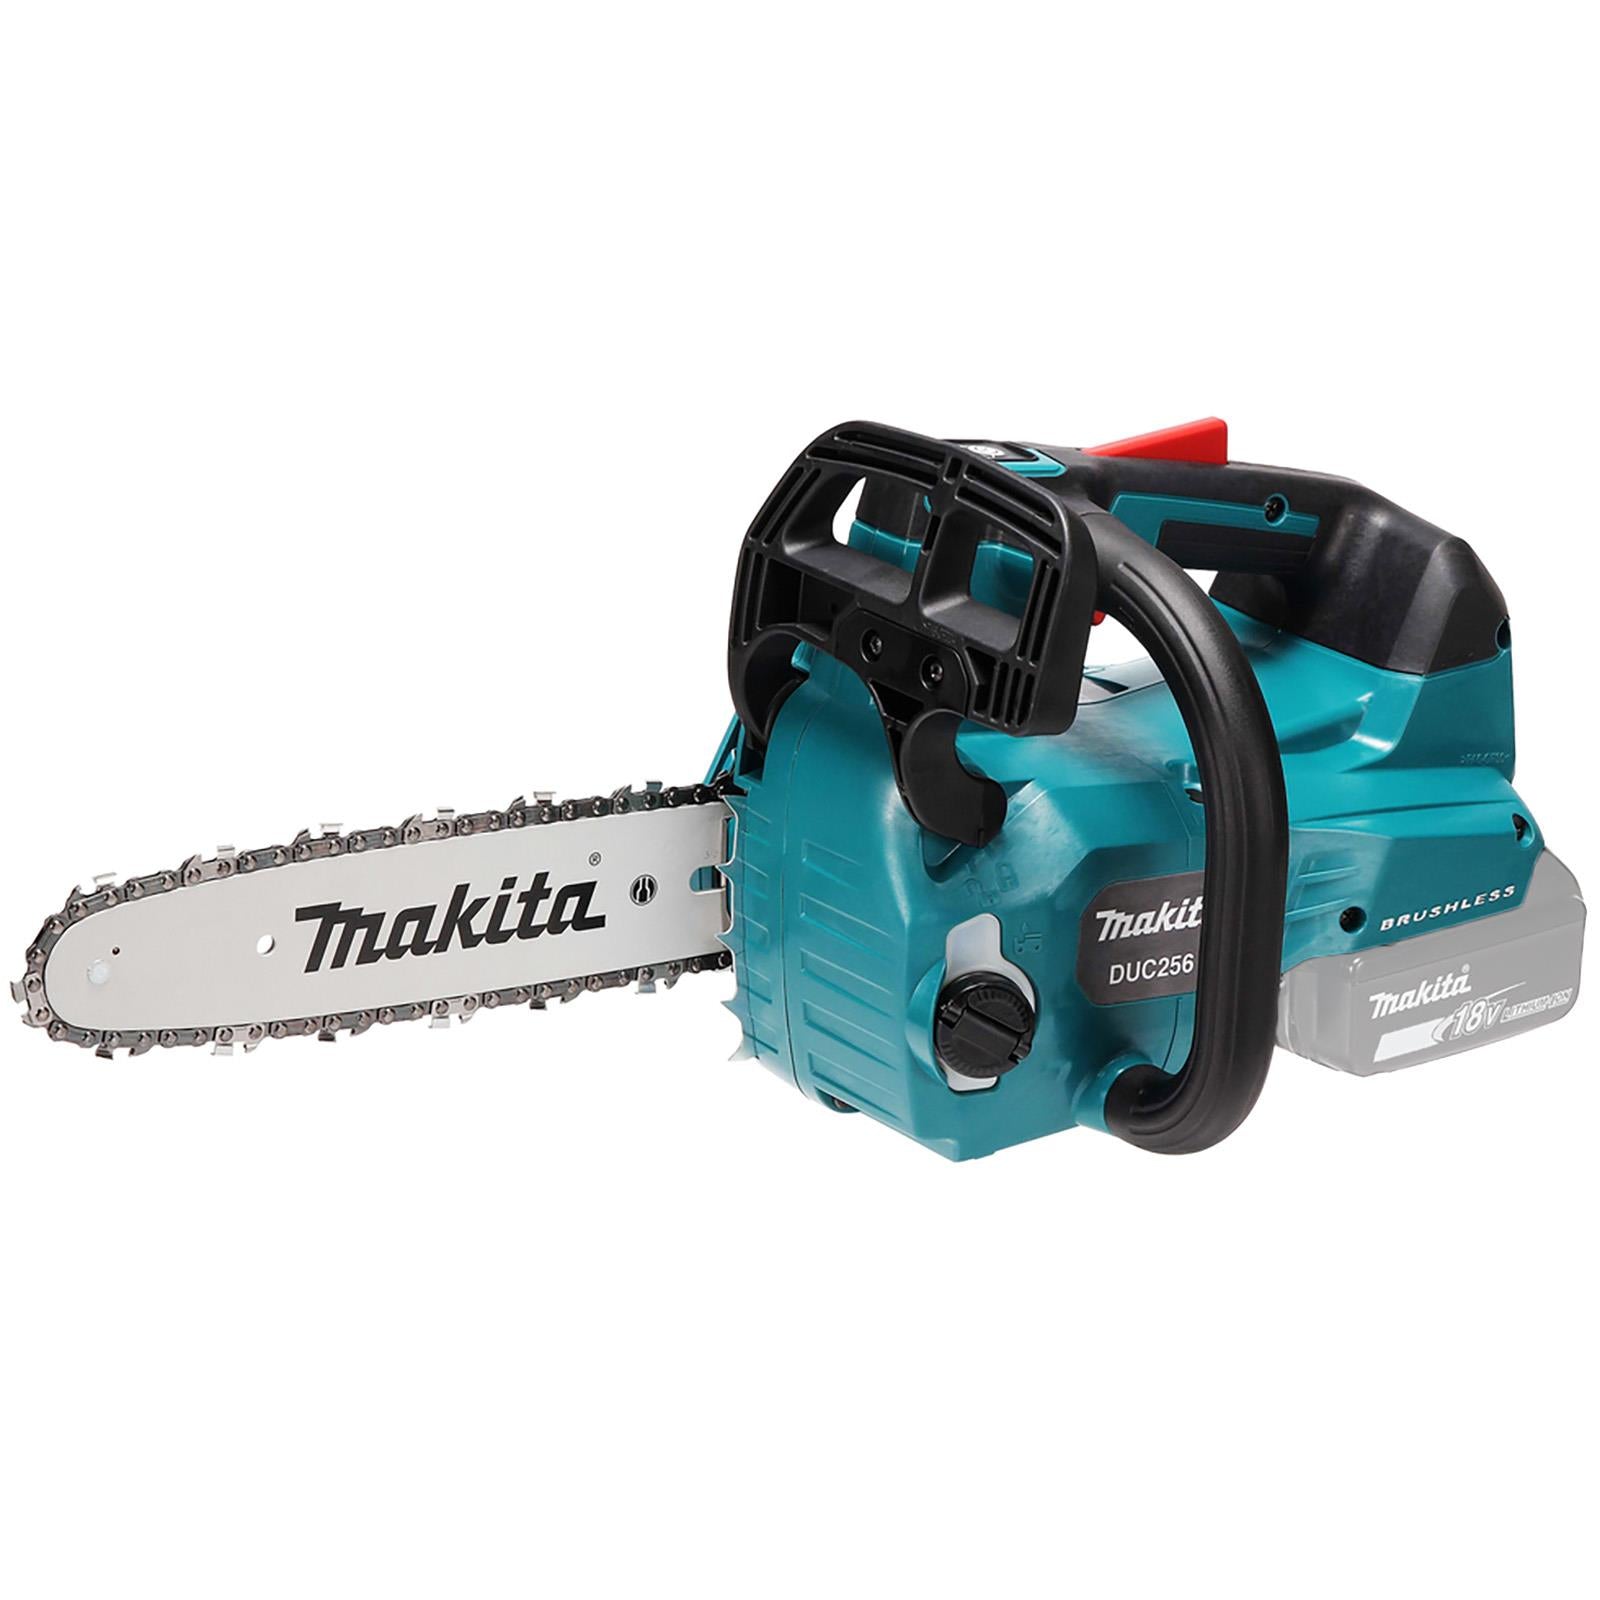 Makita Chainsaw 25cm 10" 18V x 2 LXT Brushless Cordless Top Handle Garden Tree Cutting Pruning Bare Unit Body Only DUC256Z